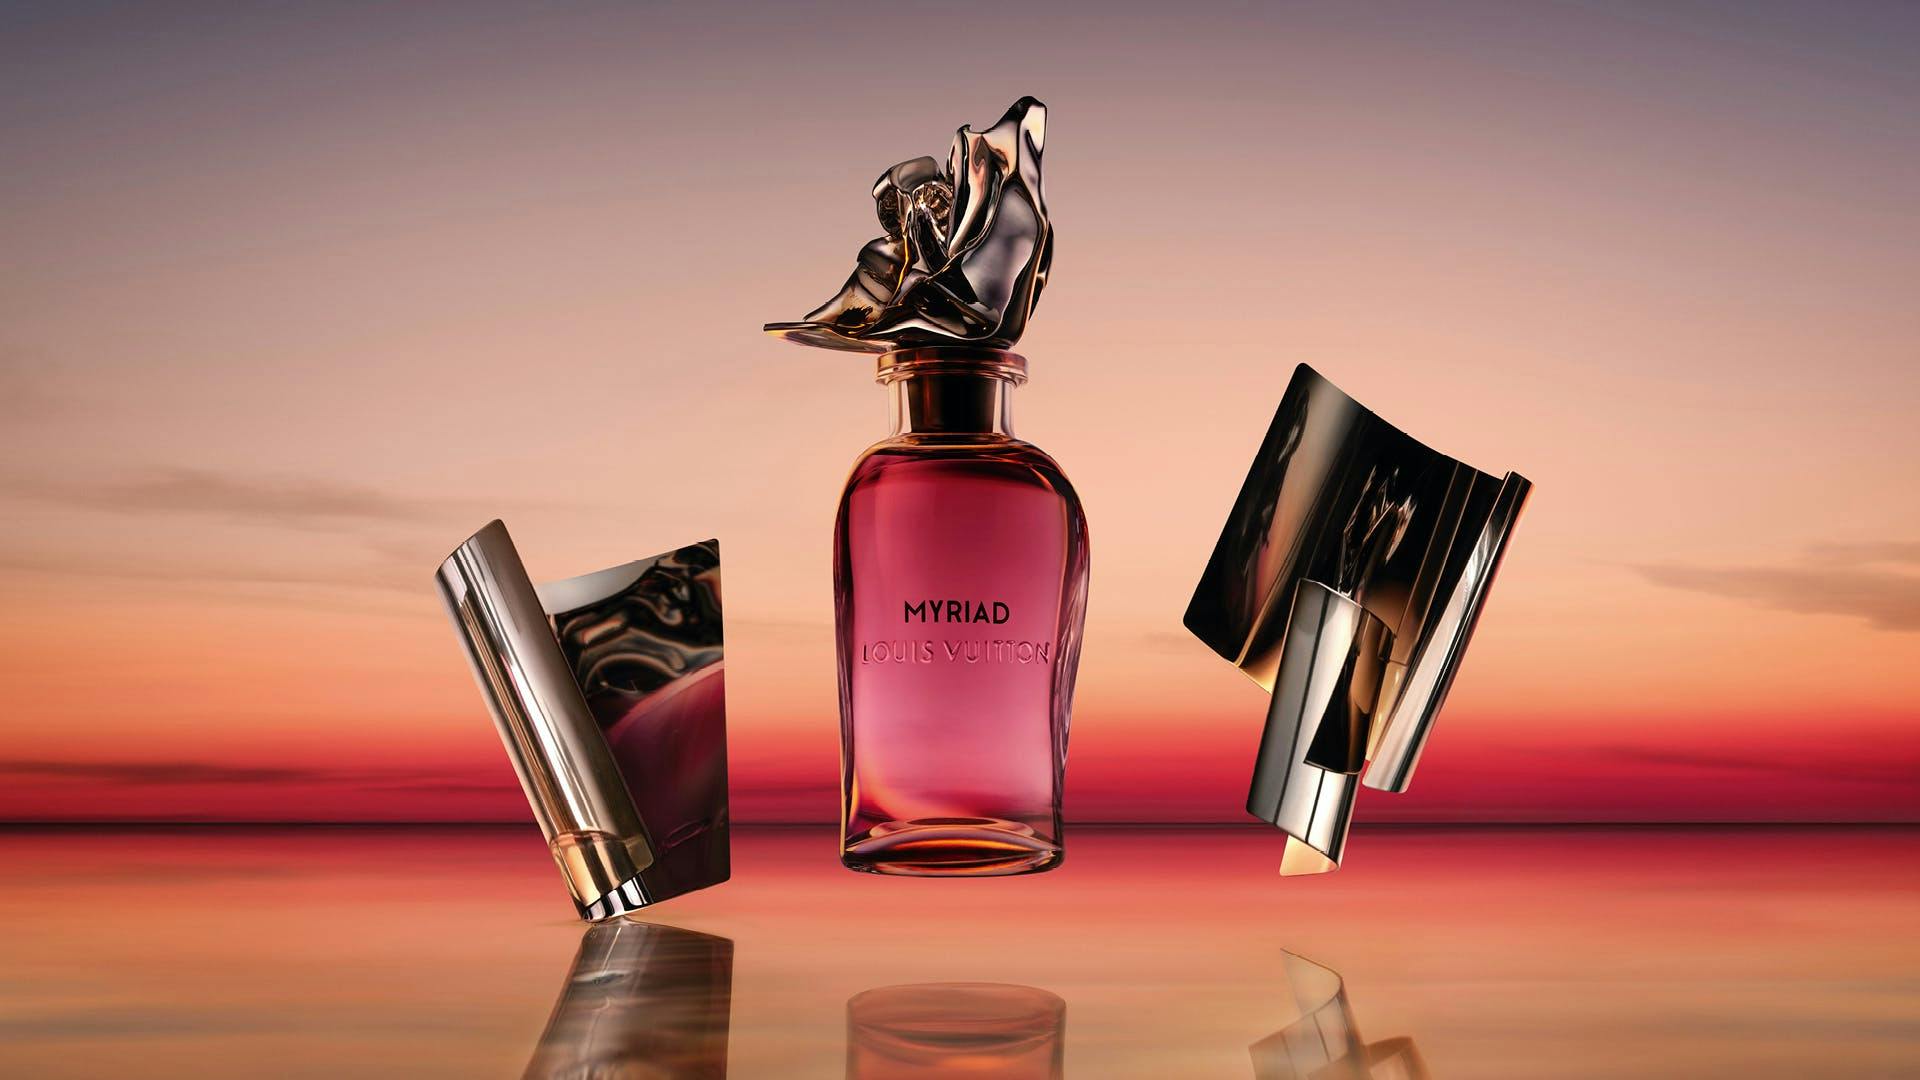 a pink bottle of perfume against an orange sunset backdrop